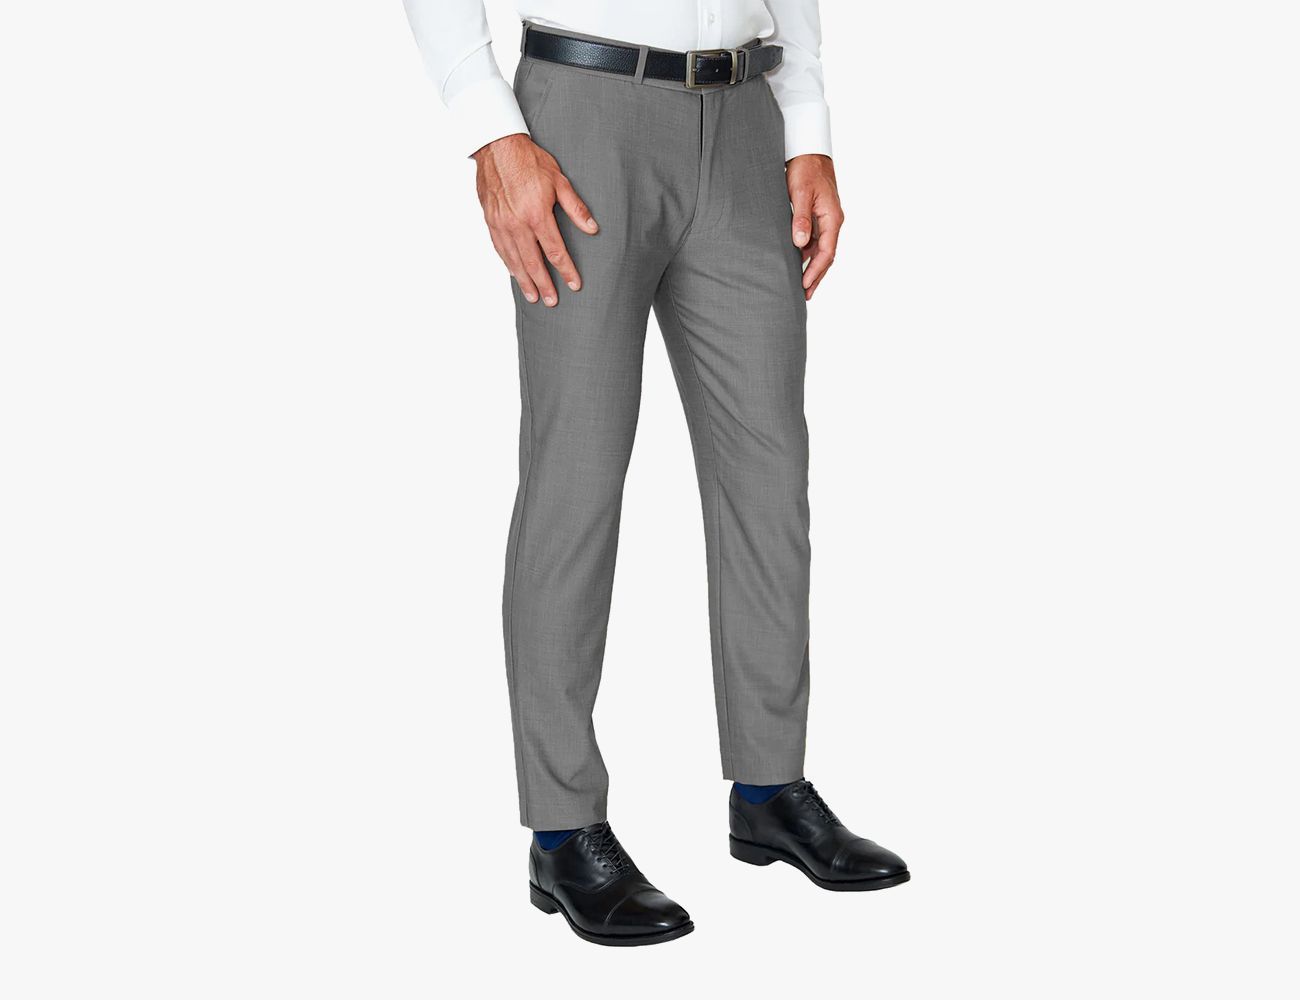 The Best Dress Pants for Mastering Business Casual